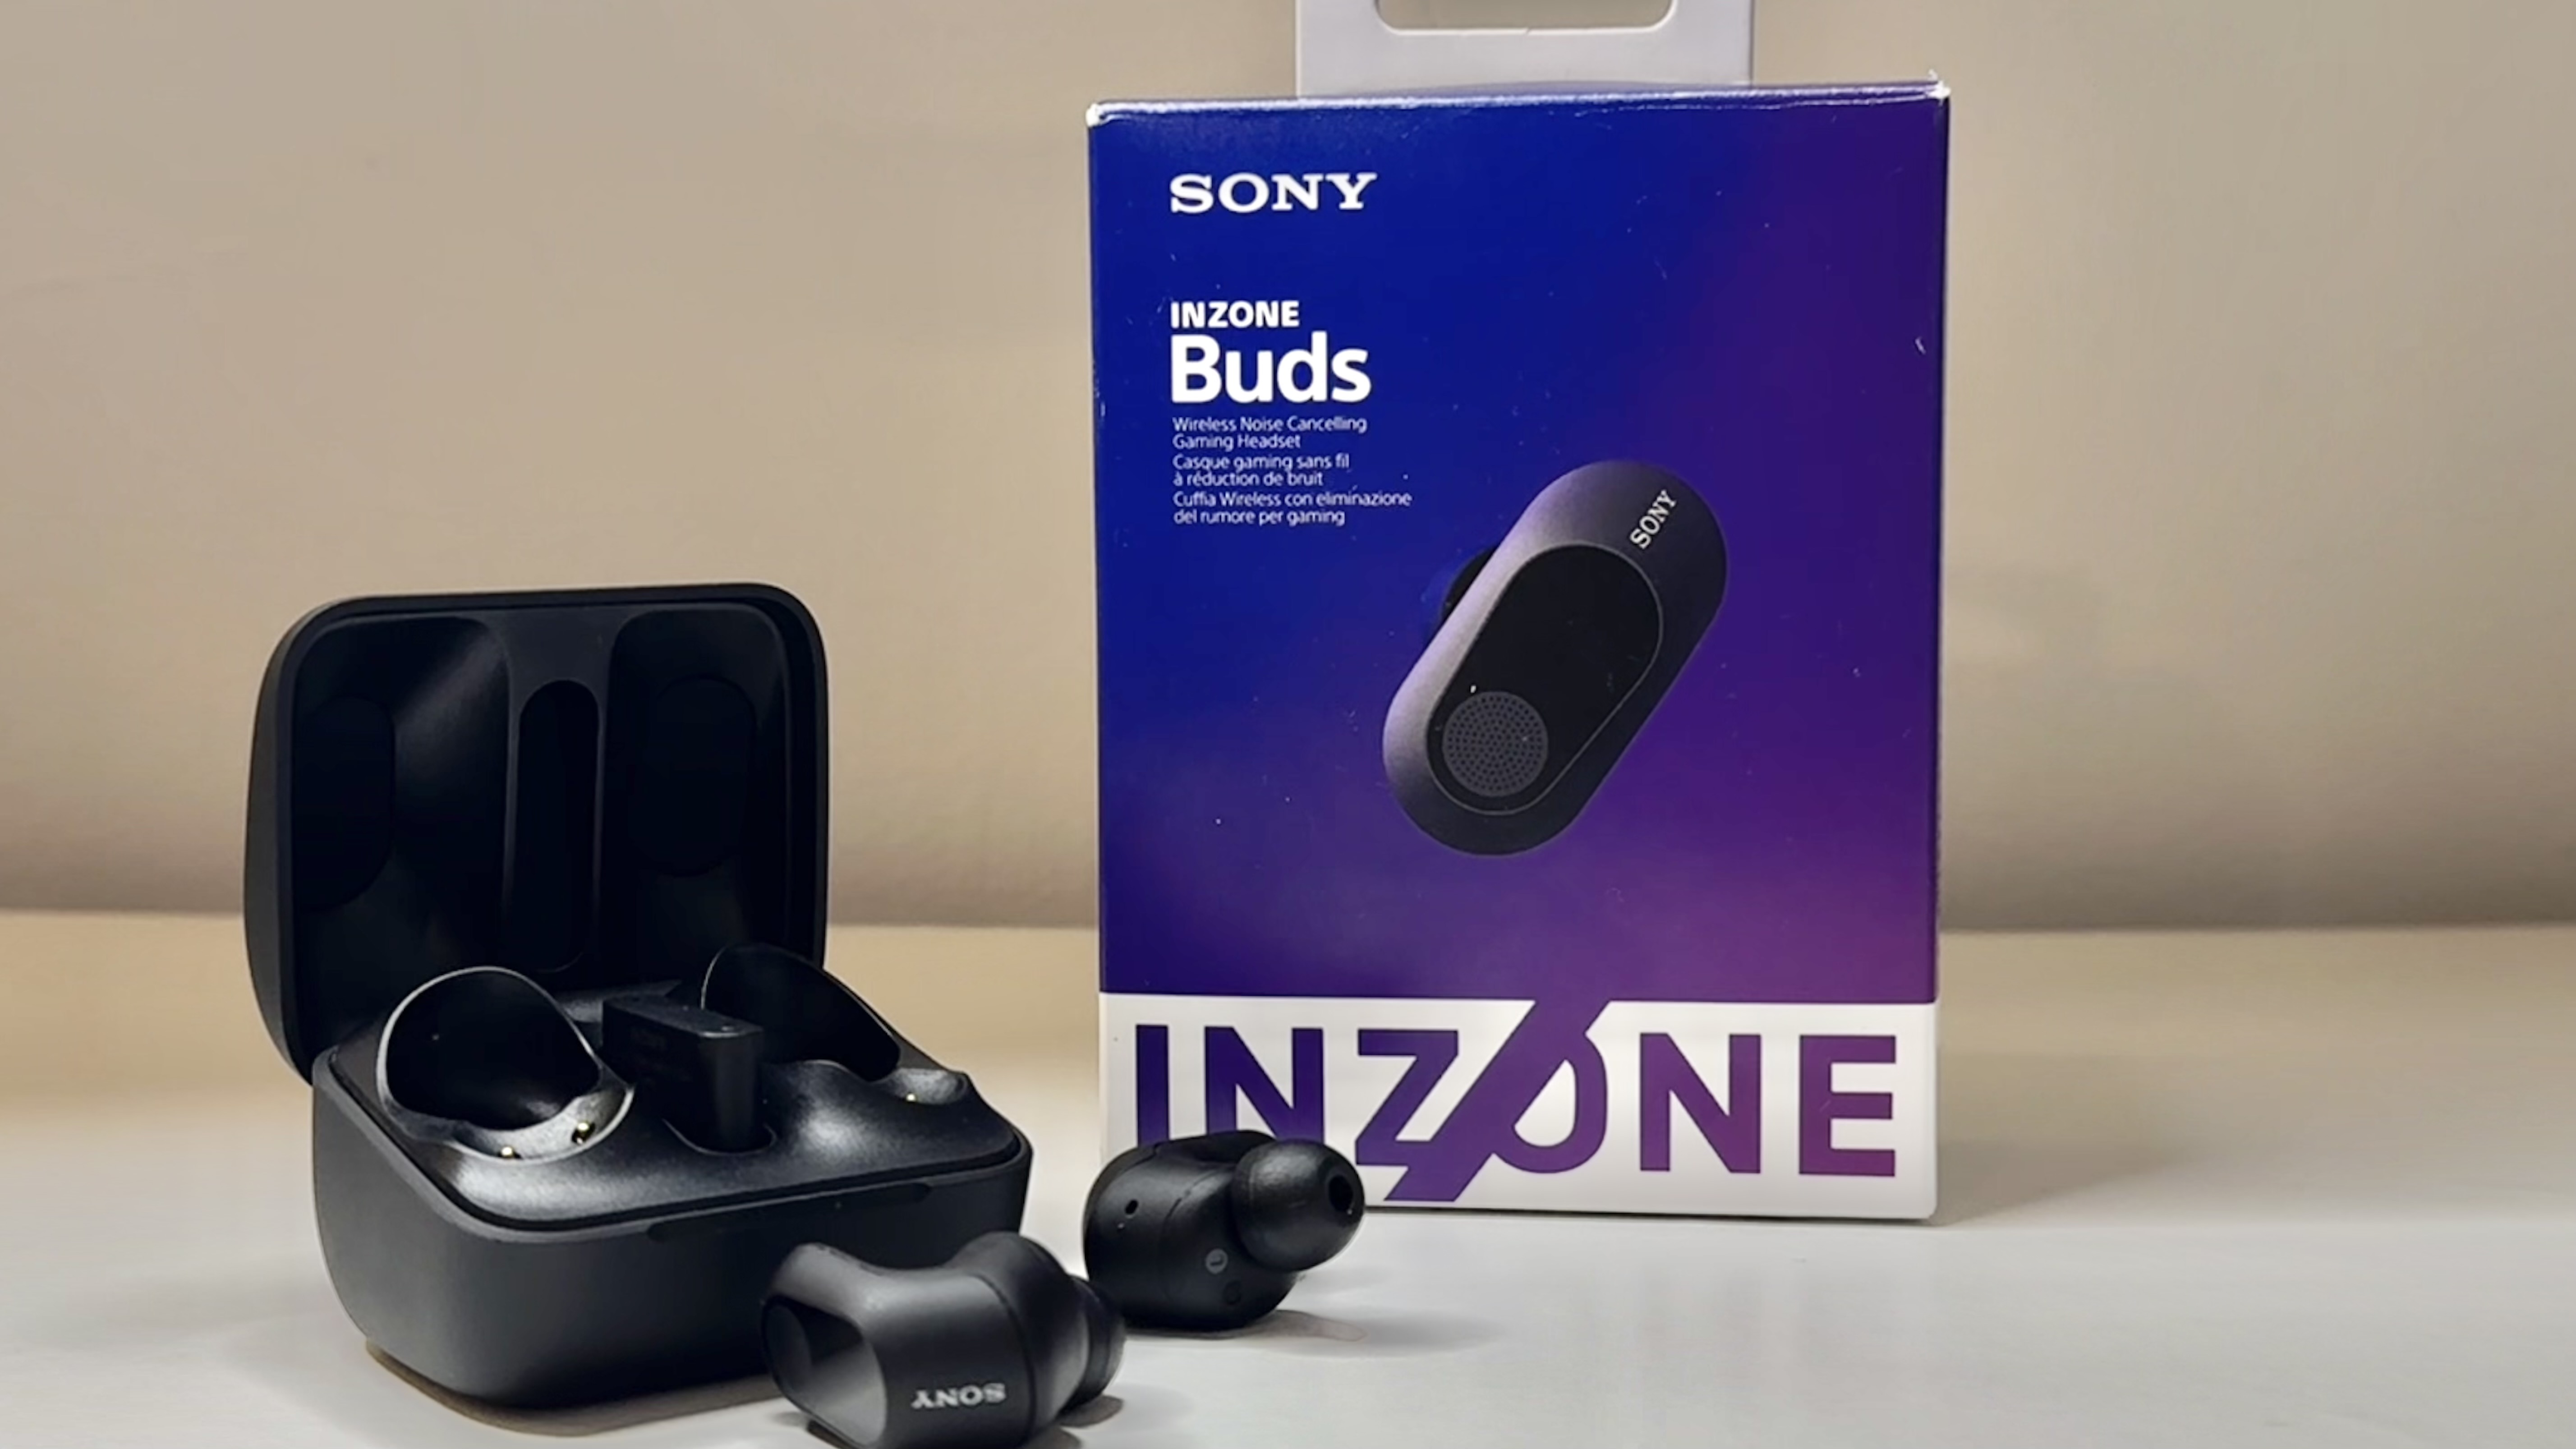 Sony InZone Buds on a desk with the packaging.